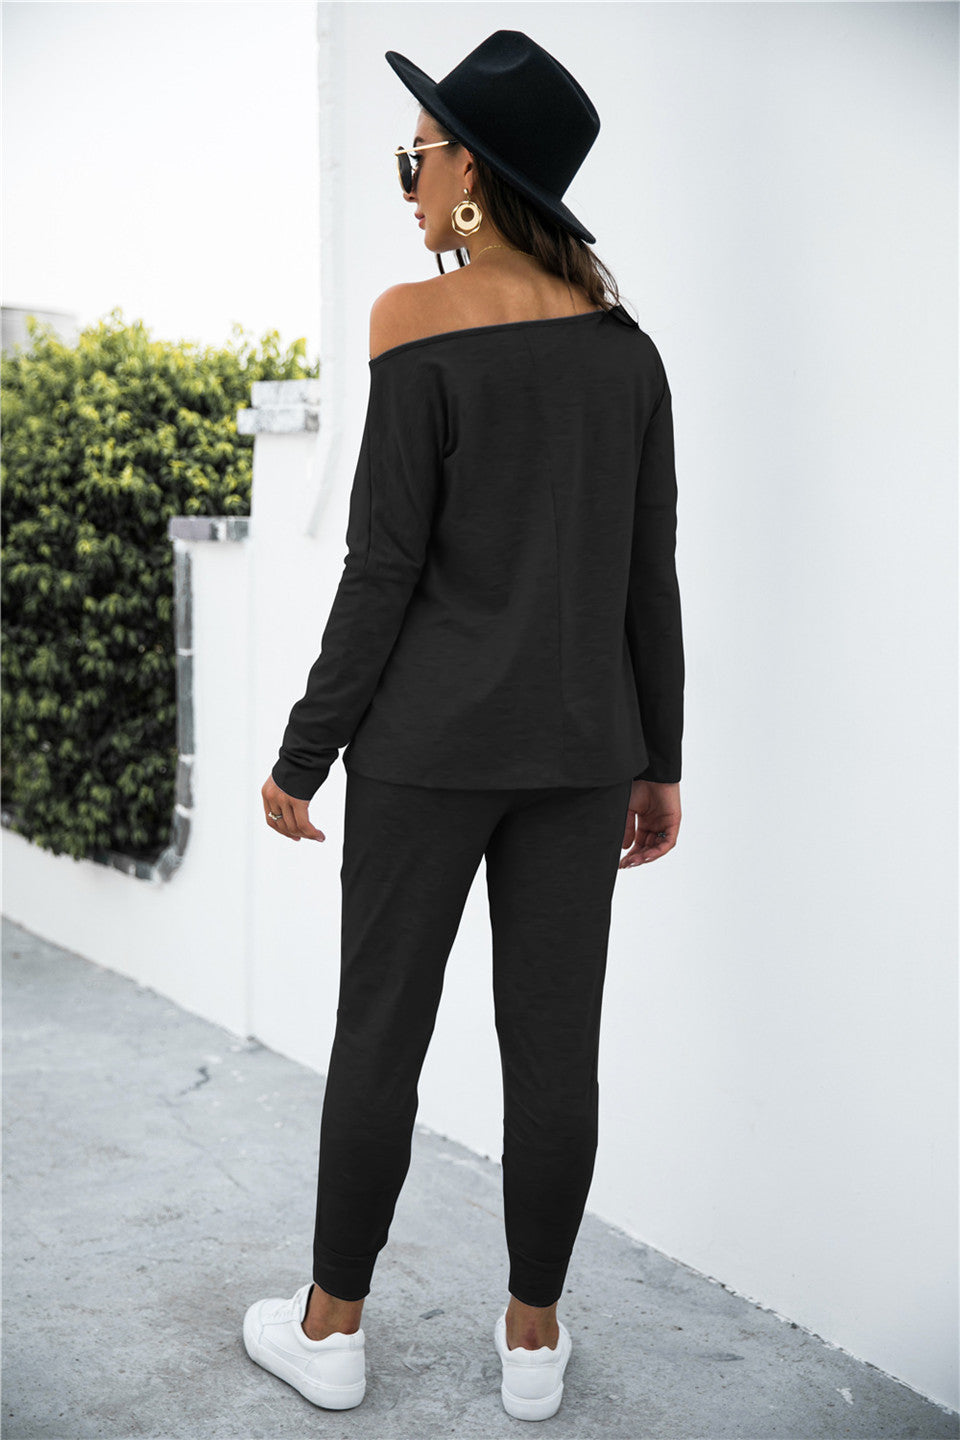 Fashion Women Jumpsuits With Pockets